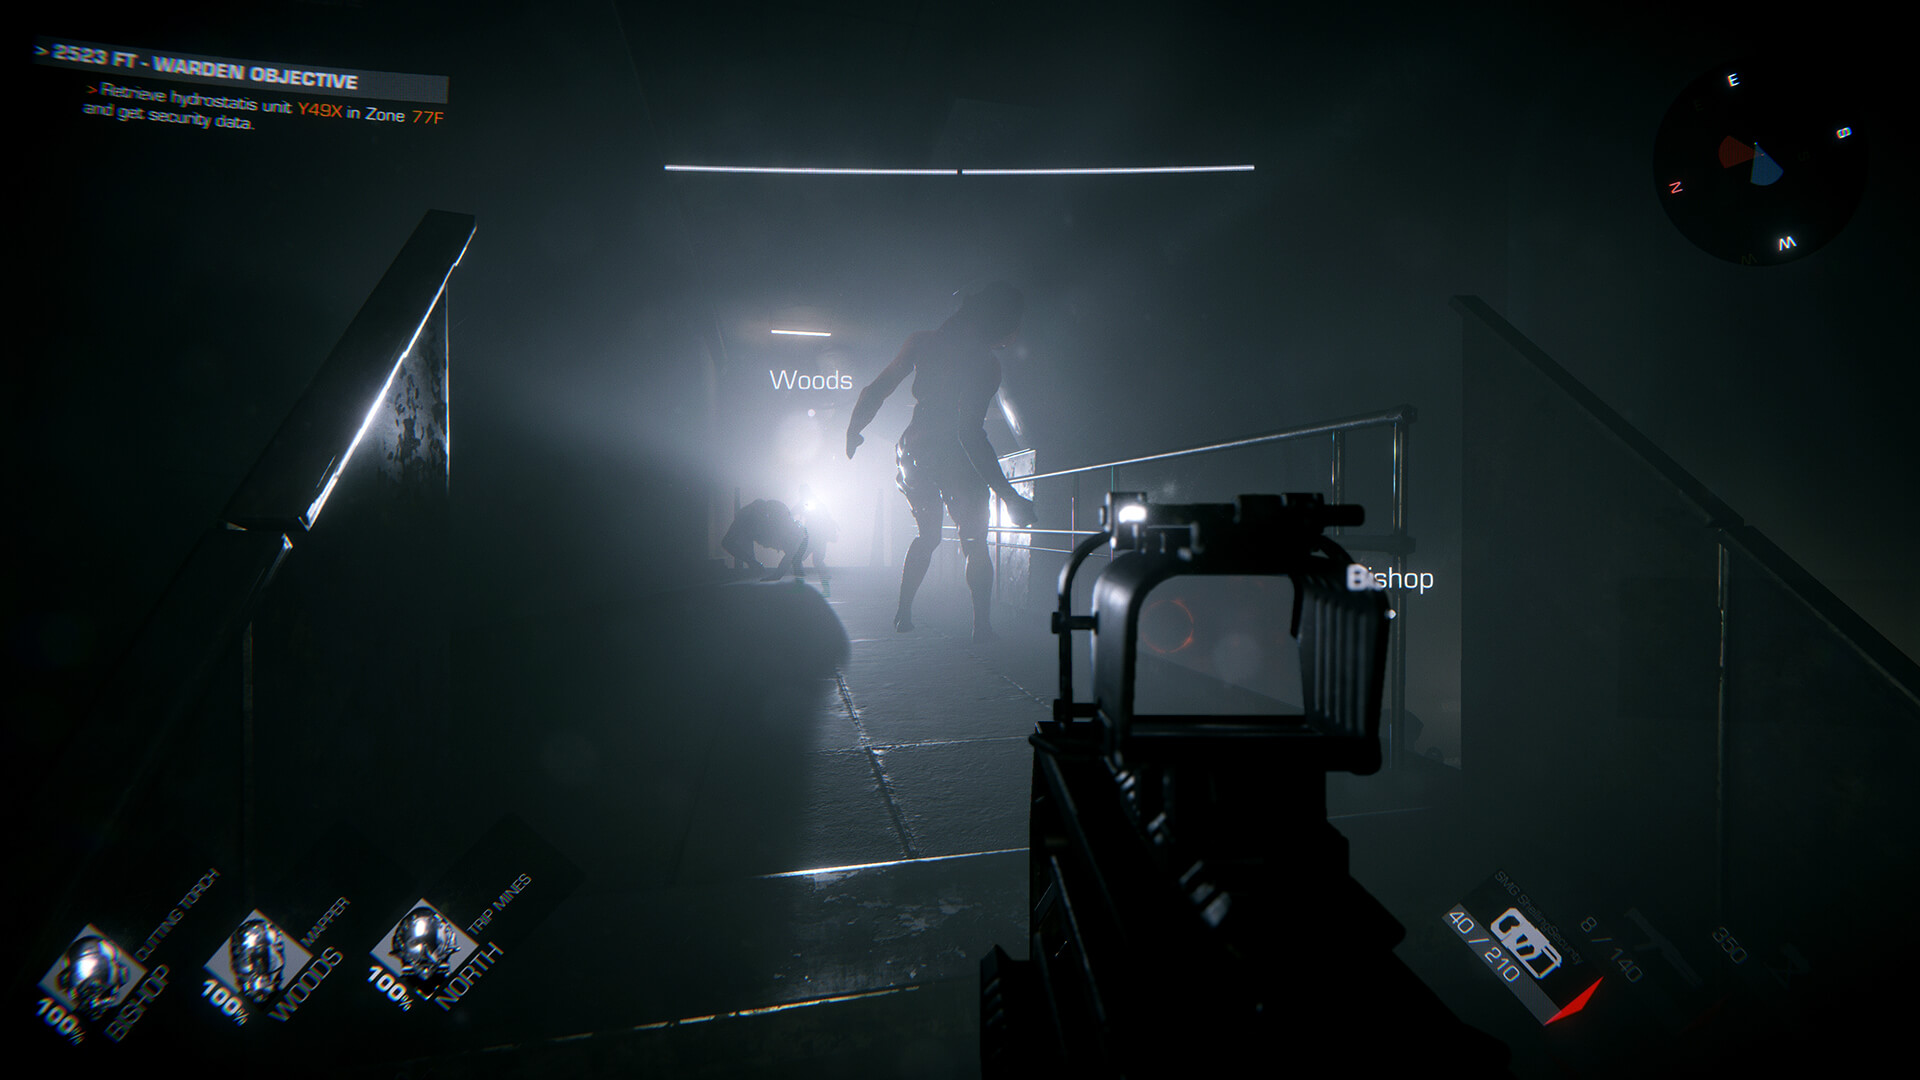 GTFO 4 player co-op FPS launching spring 2019 - Geeky Gadgets